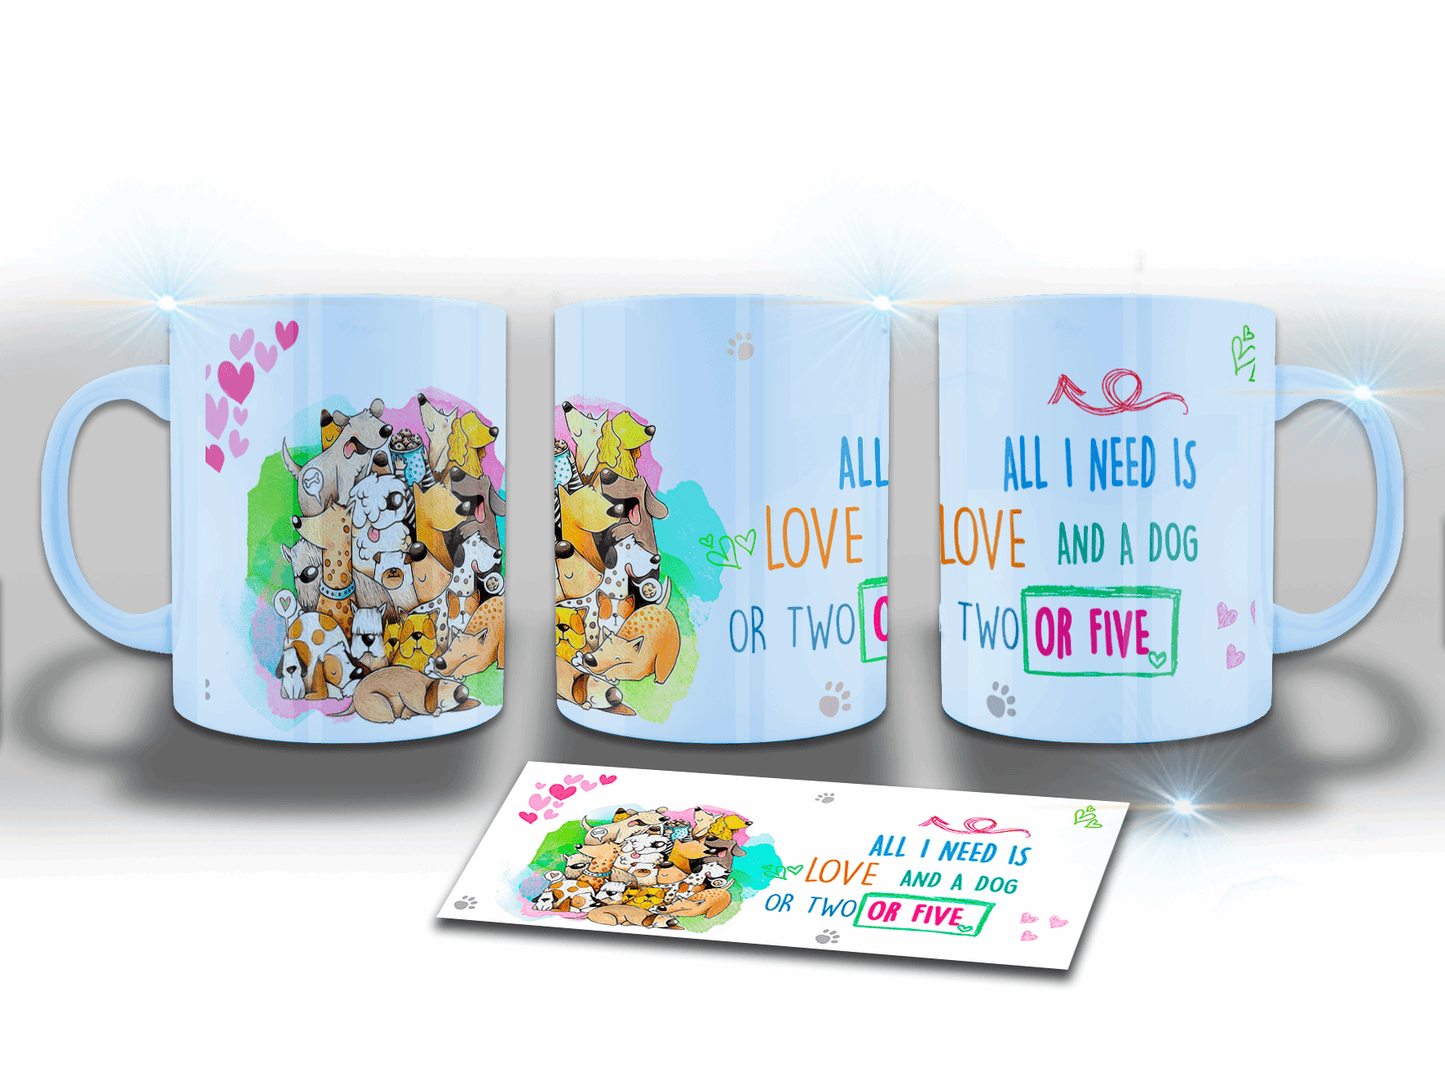  Love and a Dog or Five Mug by Free Spirit Accessories sold by Free Spirit Accessories